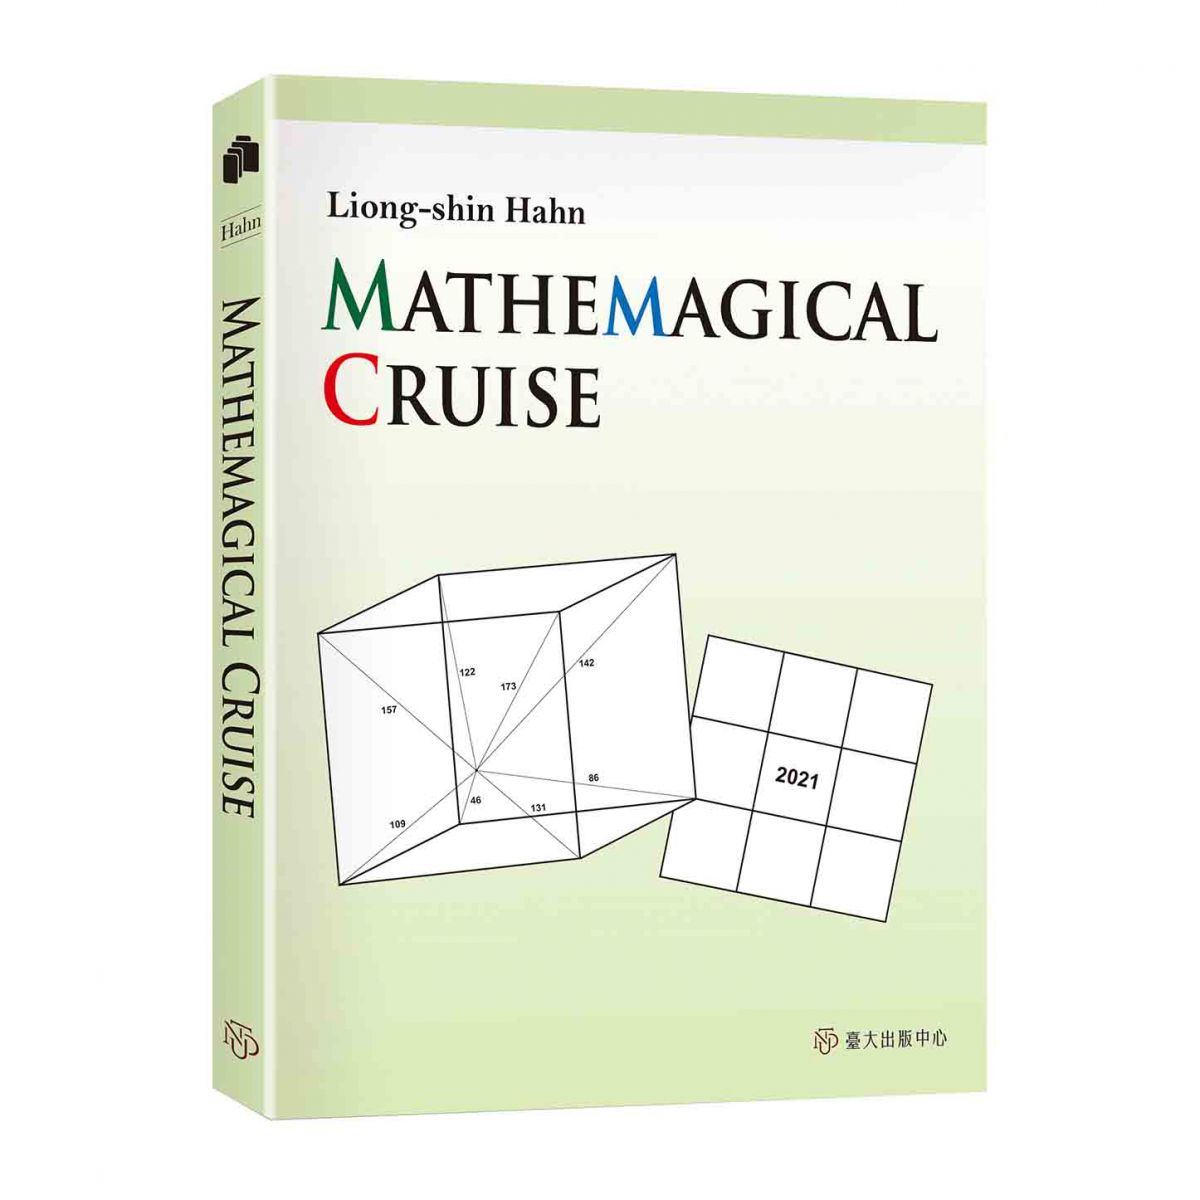 《Mathemagical Cruise》offers shining examples of how to approach problem solving